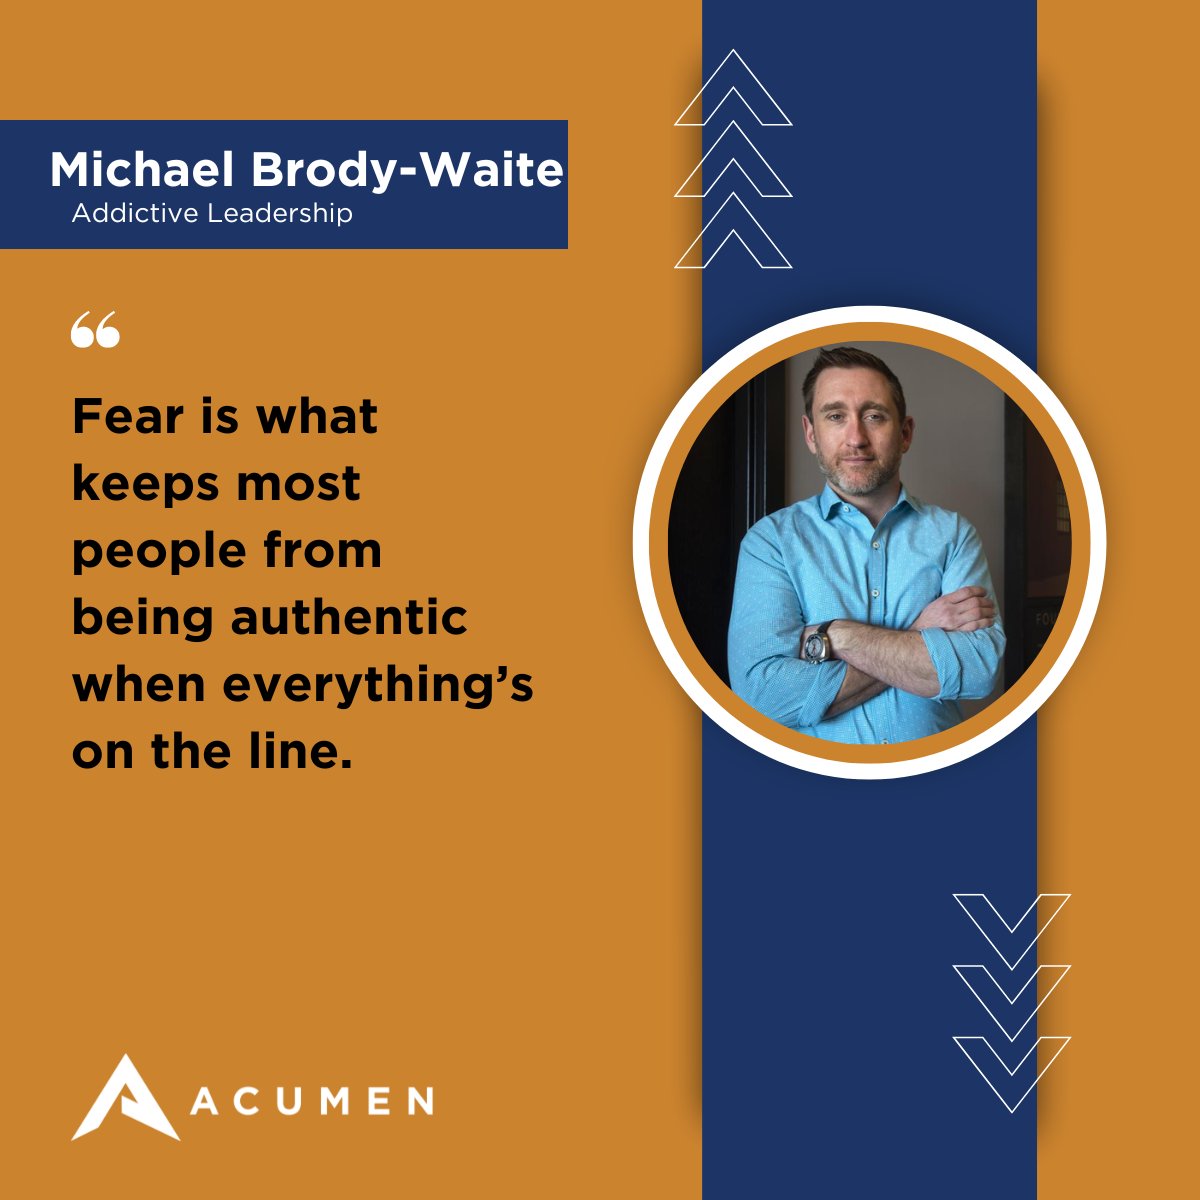 Our members experienced an incredible Q1 Advance Leadership Workshop this week! Sending our thanks to Michael Brody-Waite for a rich time of learning and inspiration.

#AcumenAdvance #Leadership #CEO #BusinessOwner #ValueBuilder #Sharpen #Challenge #Inspire